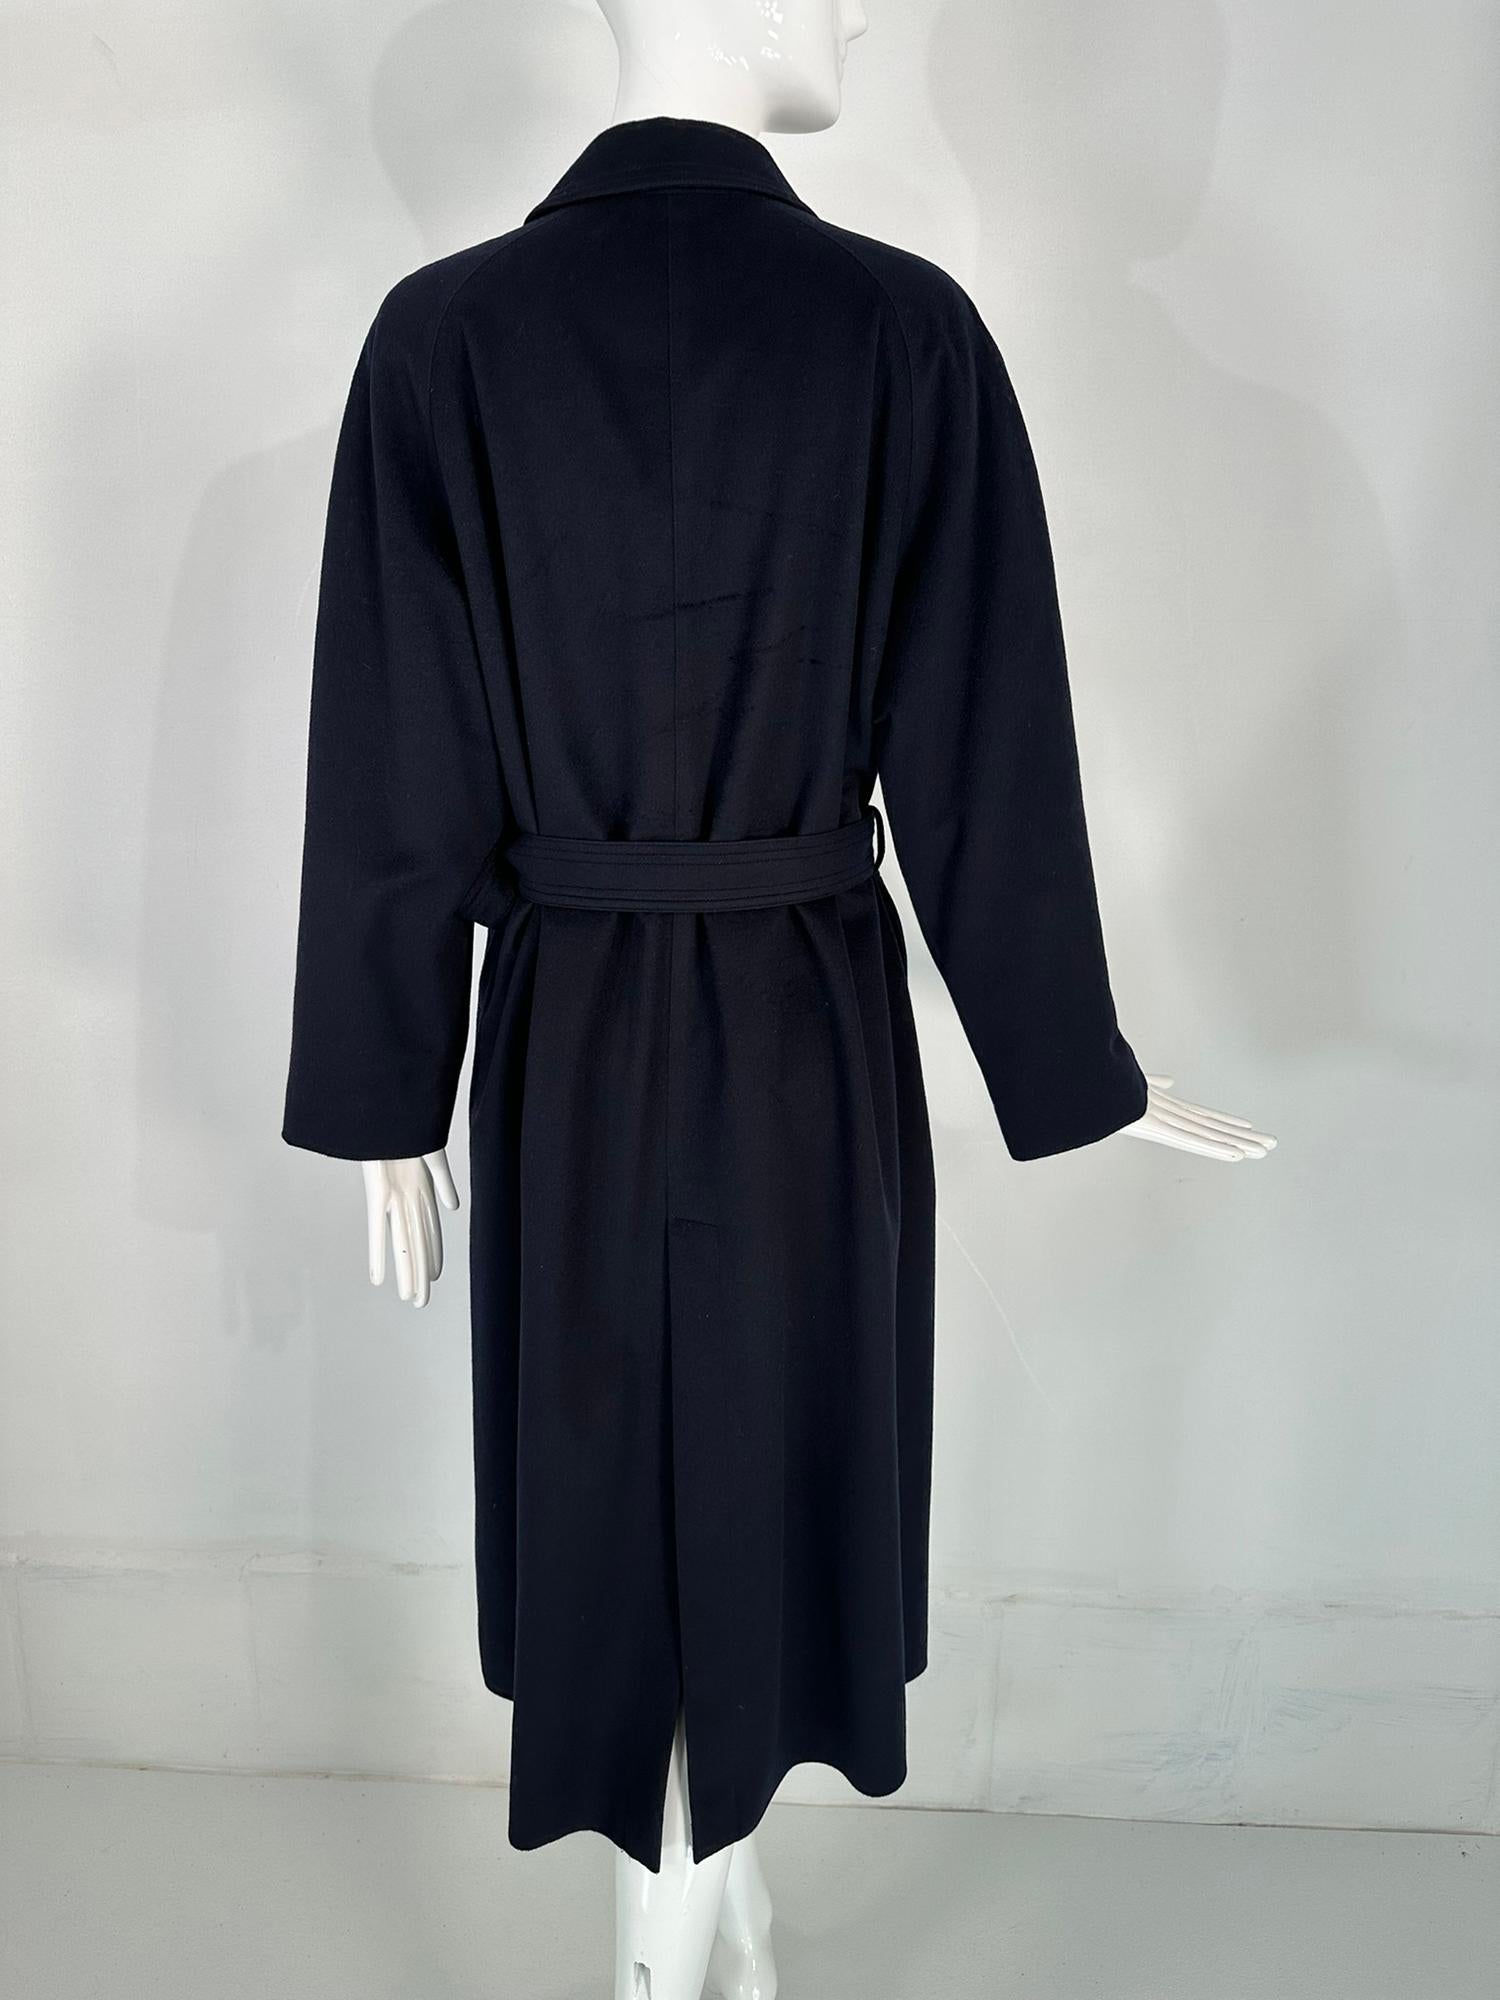 Giorgio Armani Classico Navy Blue Cashmere Raglan Sleeve Belted Over Coat  For Sale 4